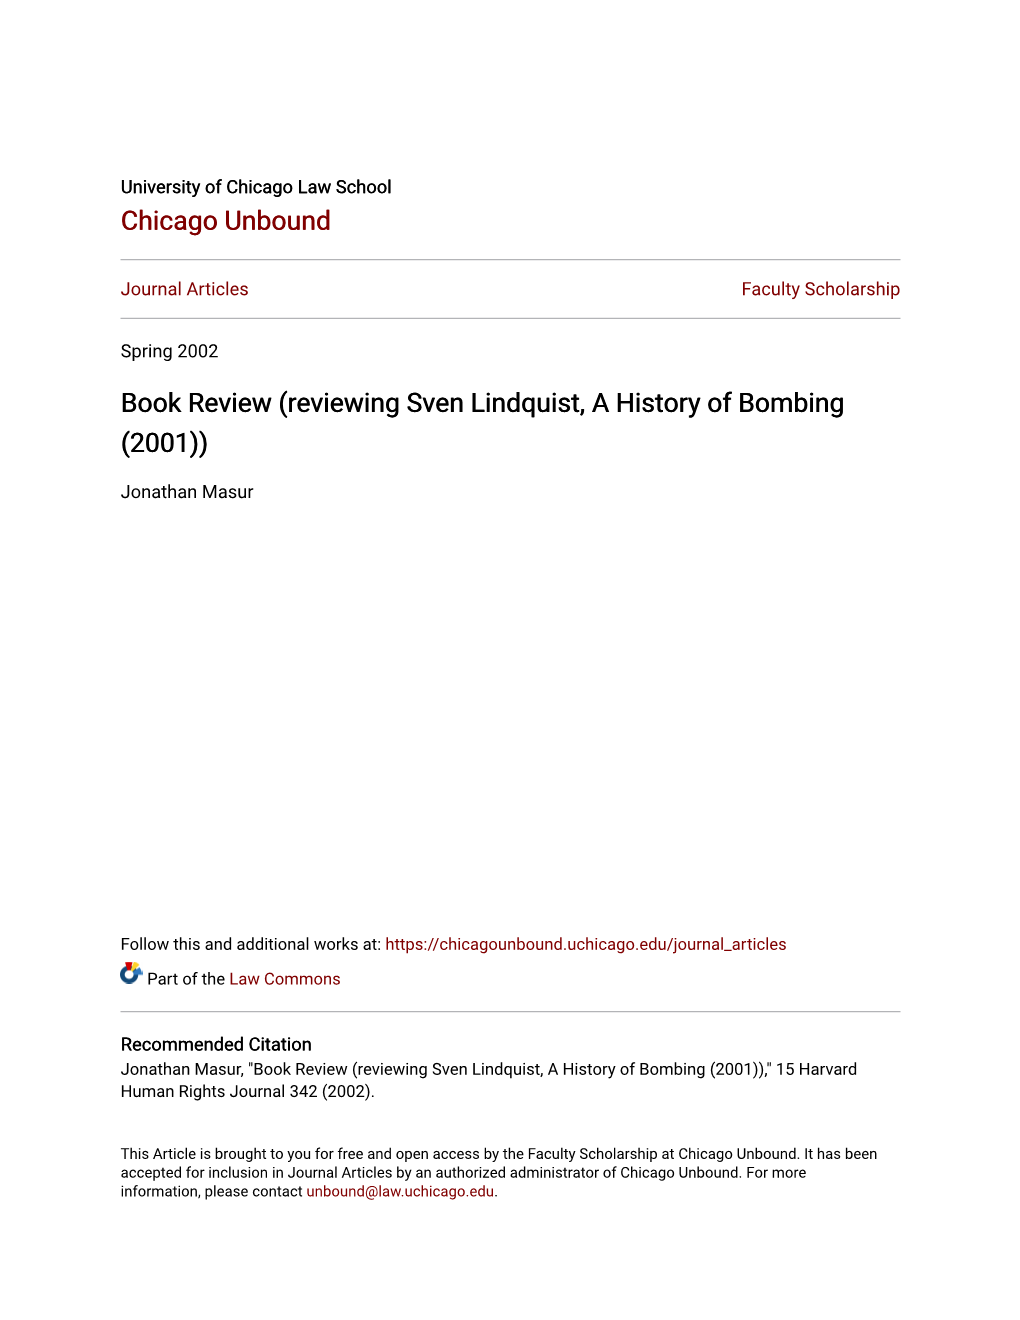 Book Review (Reviewing Sven Lindquist, a History of Bombing (2001))